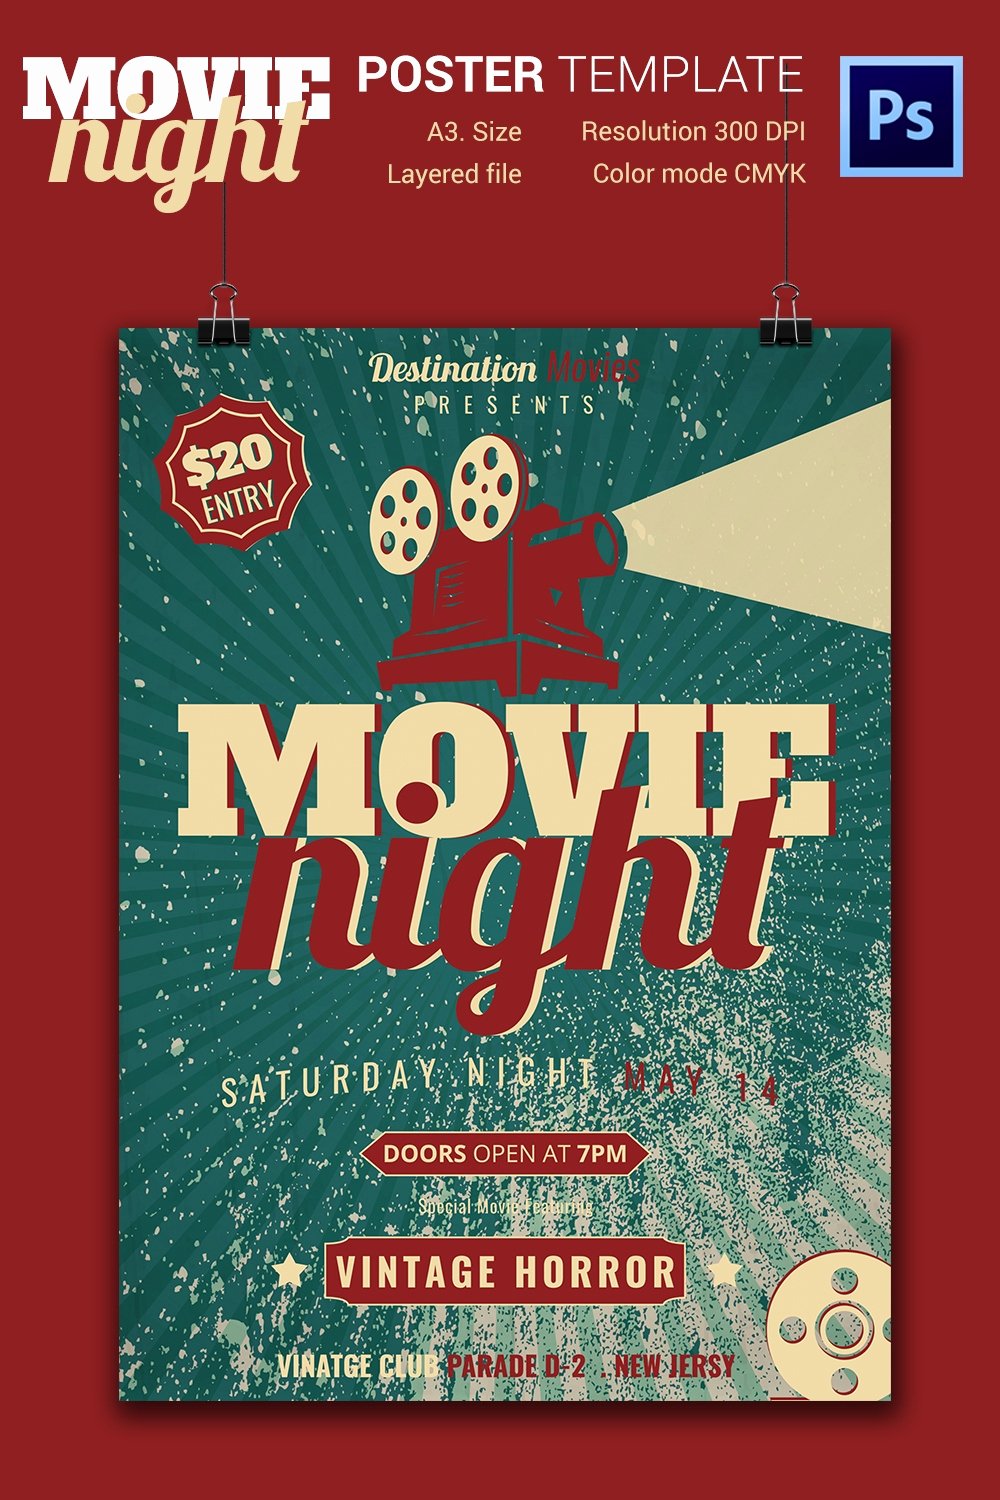 Free Movie Night Flyer Template Awesome Movie Night Flyer Template 25 Free Jpg Psd format